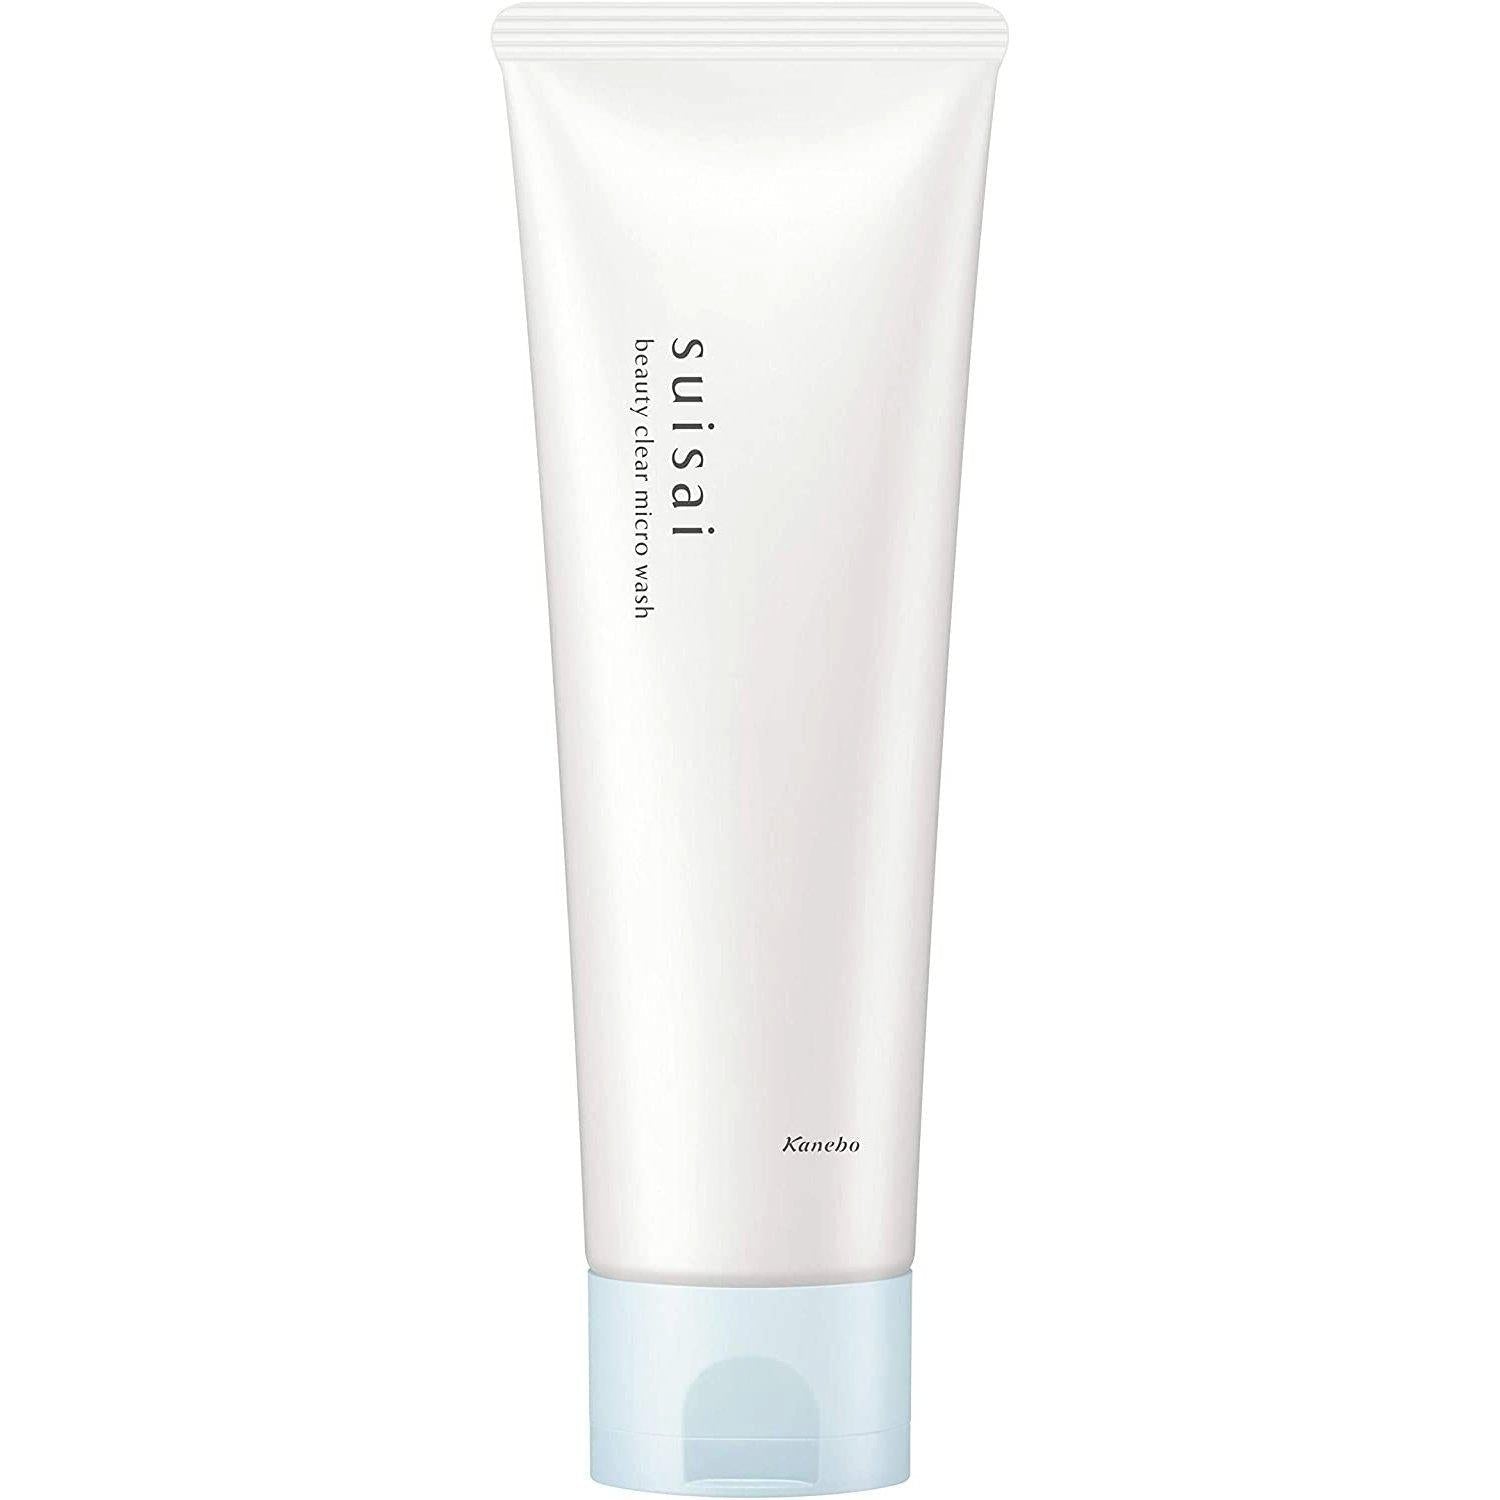 Kanebo Suisai Beauty Clear Micro Clay Wash 130g